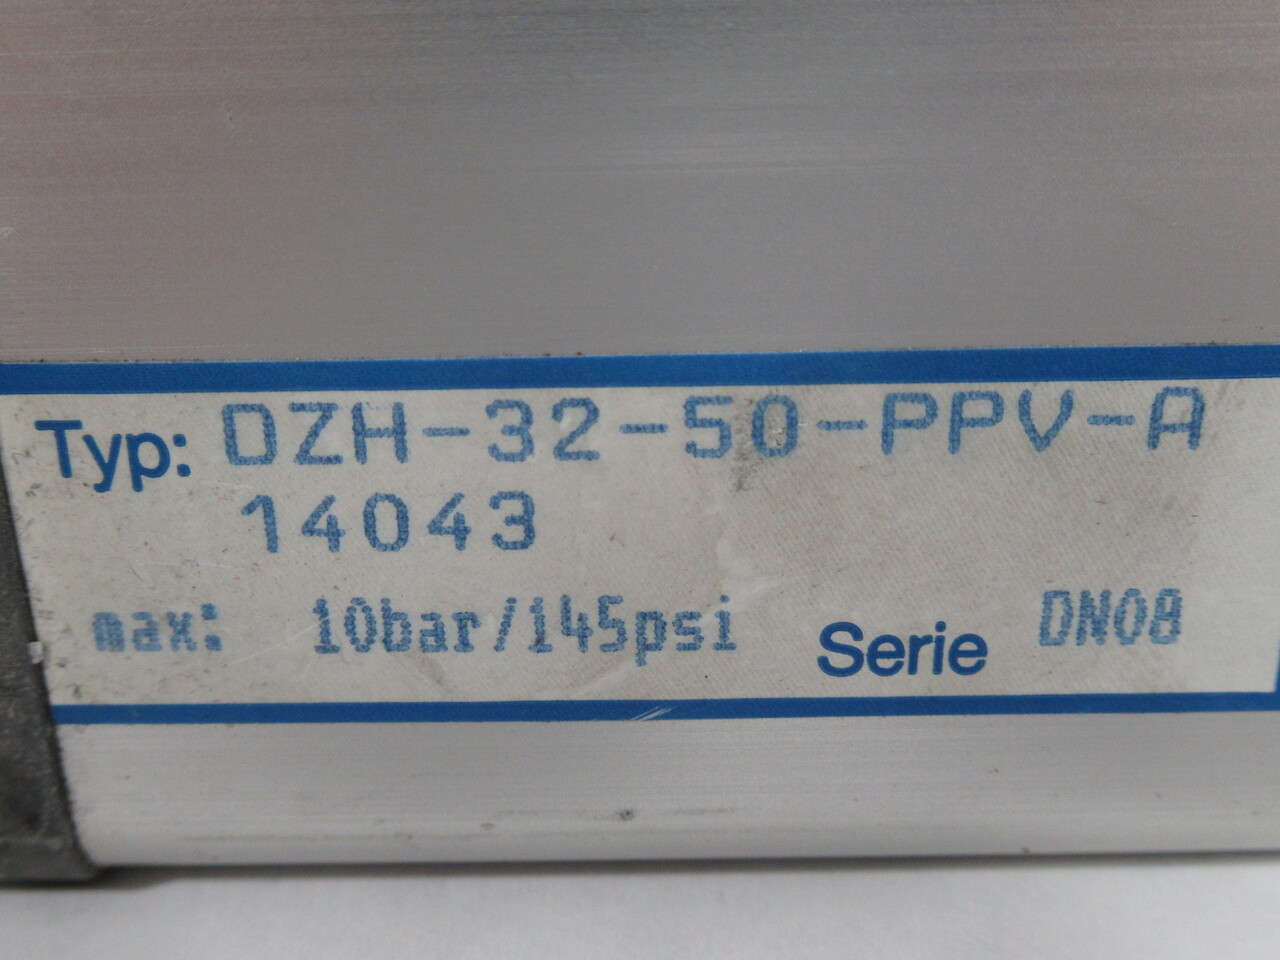 Festo DZH-32-50-PPV-A 14043 Pneumatic Cylinder 32mm Bore 50mm Stroke USED